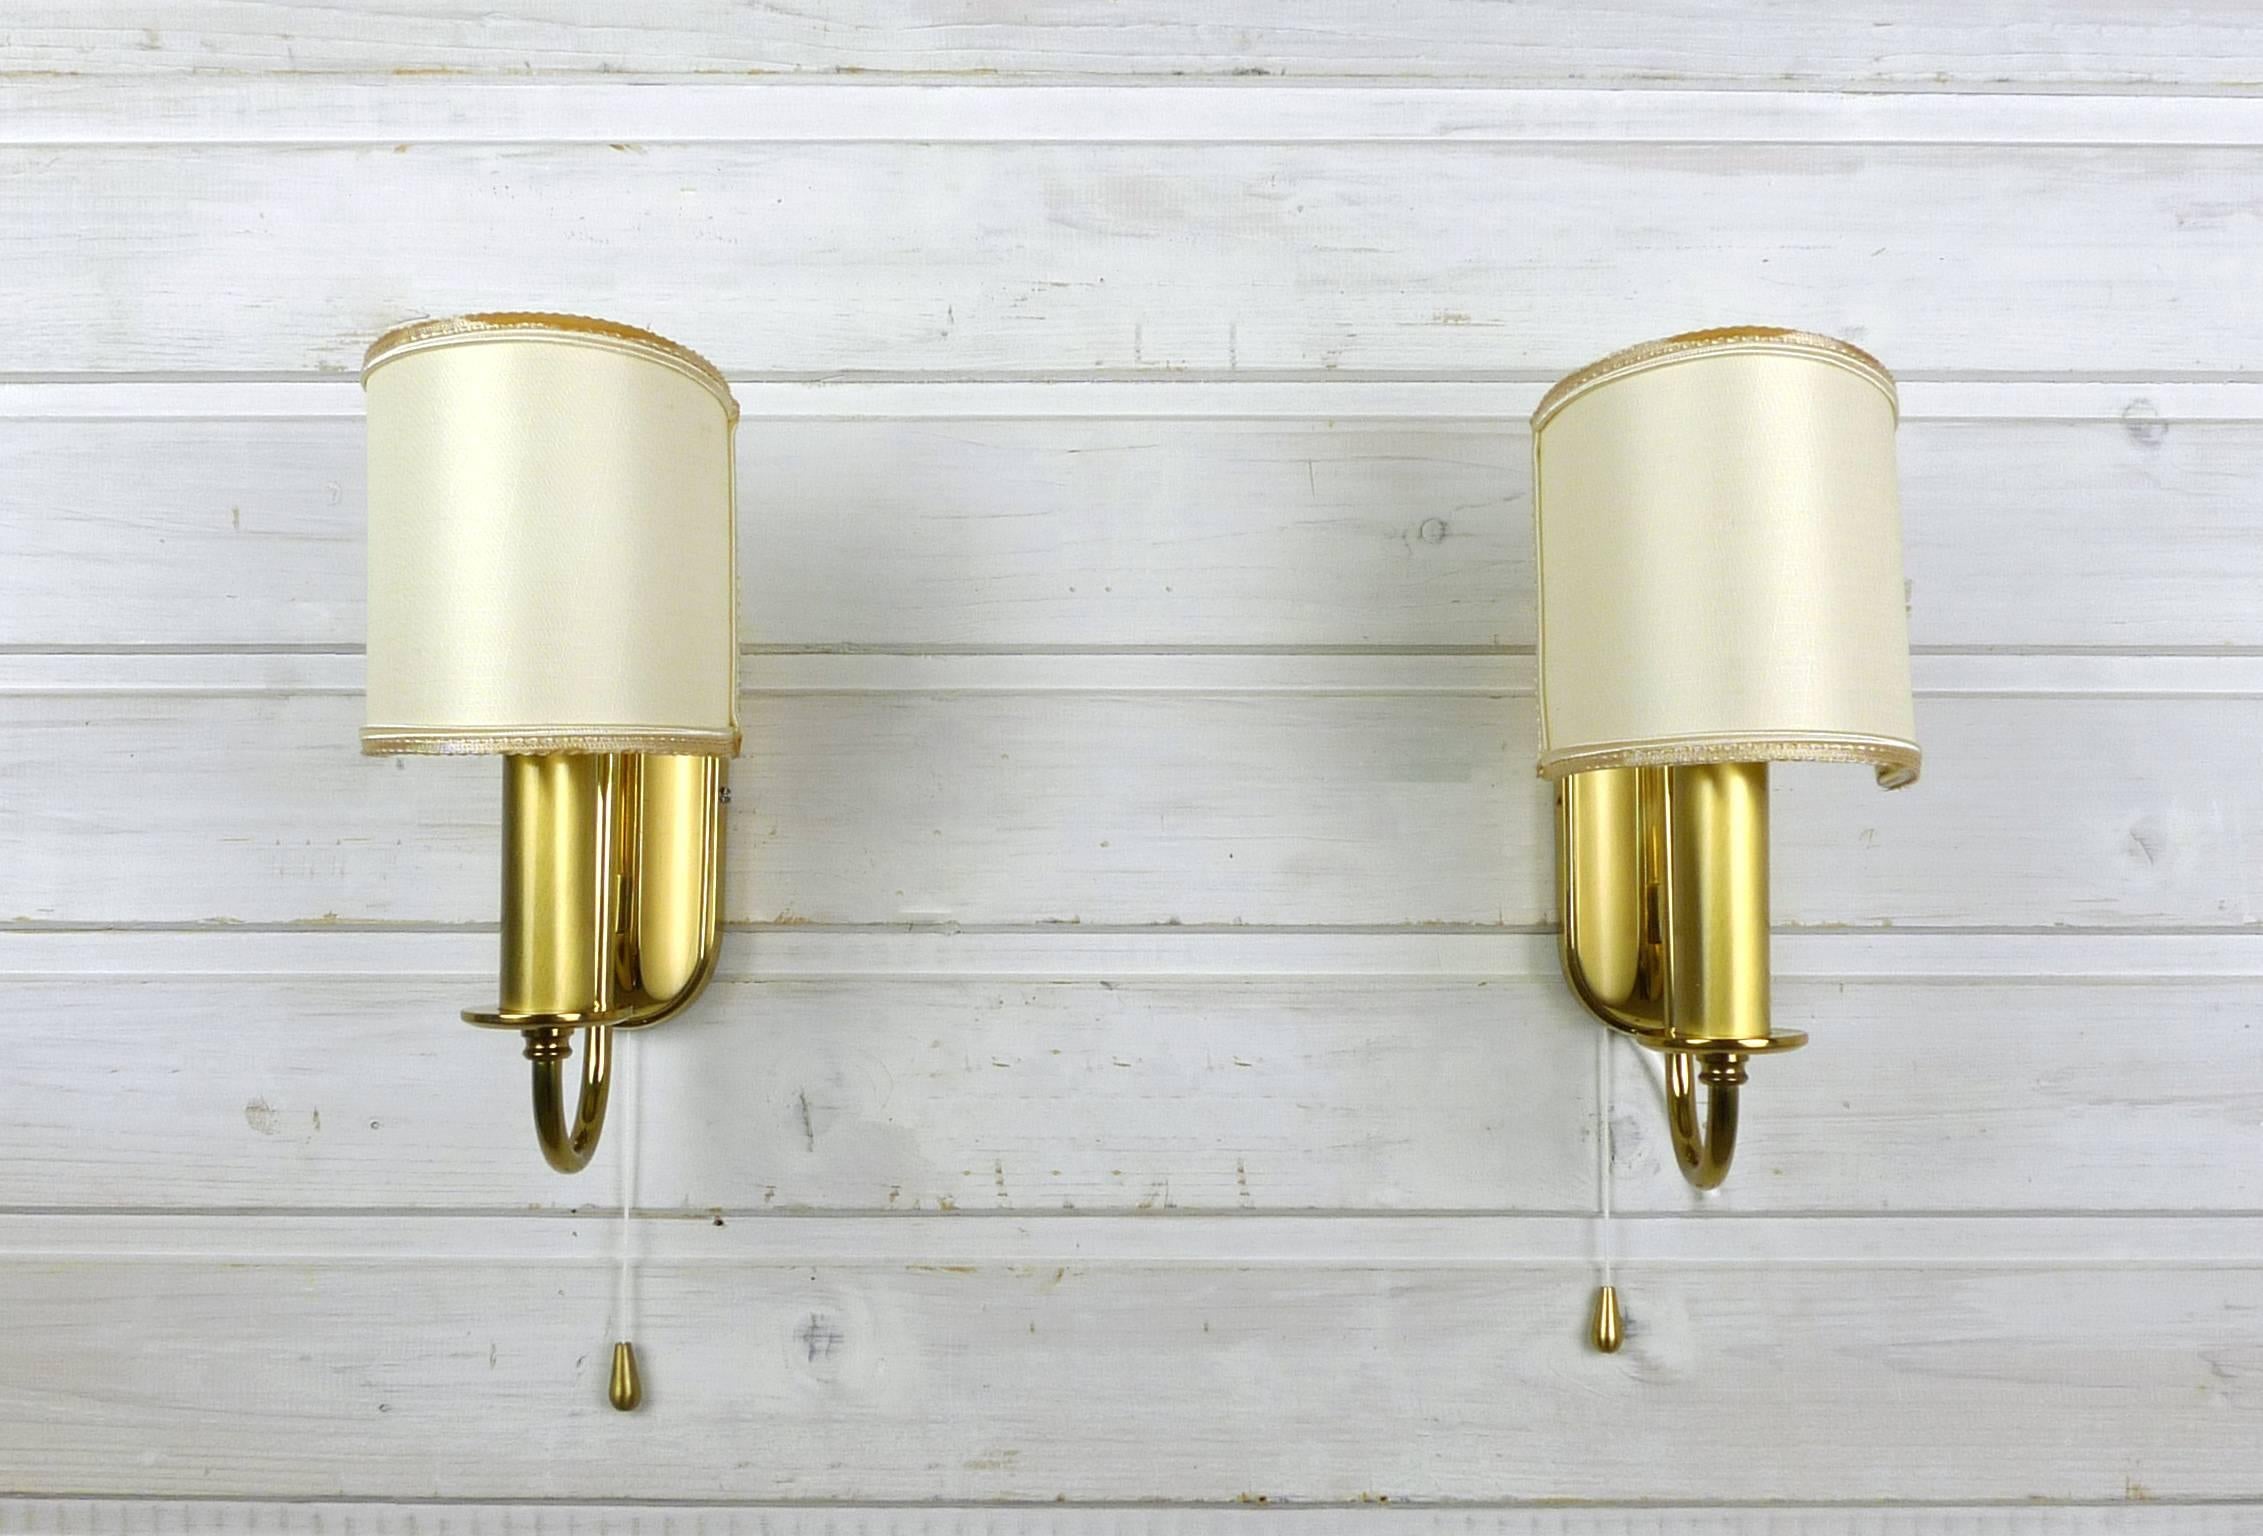 A pair of small wall lamps from the 1970s by Krieg GmbH & Co KG Kremer.
The semi-circular curved lampshades are placed on candle bulbs by means of a clamping clasp. Each lamp has an E 14 socket and can be operated by means of a pull switch.
Light